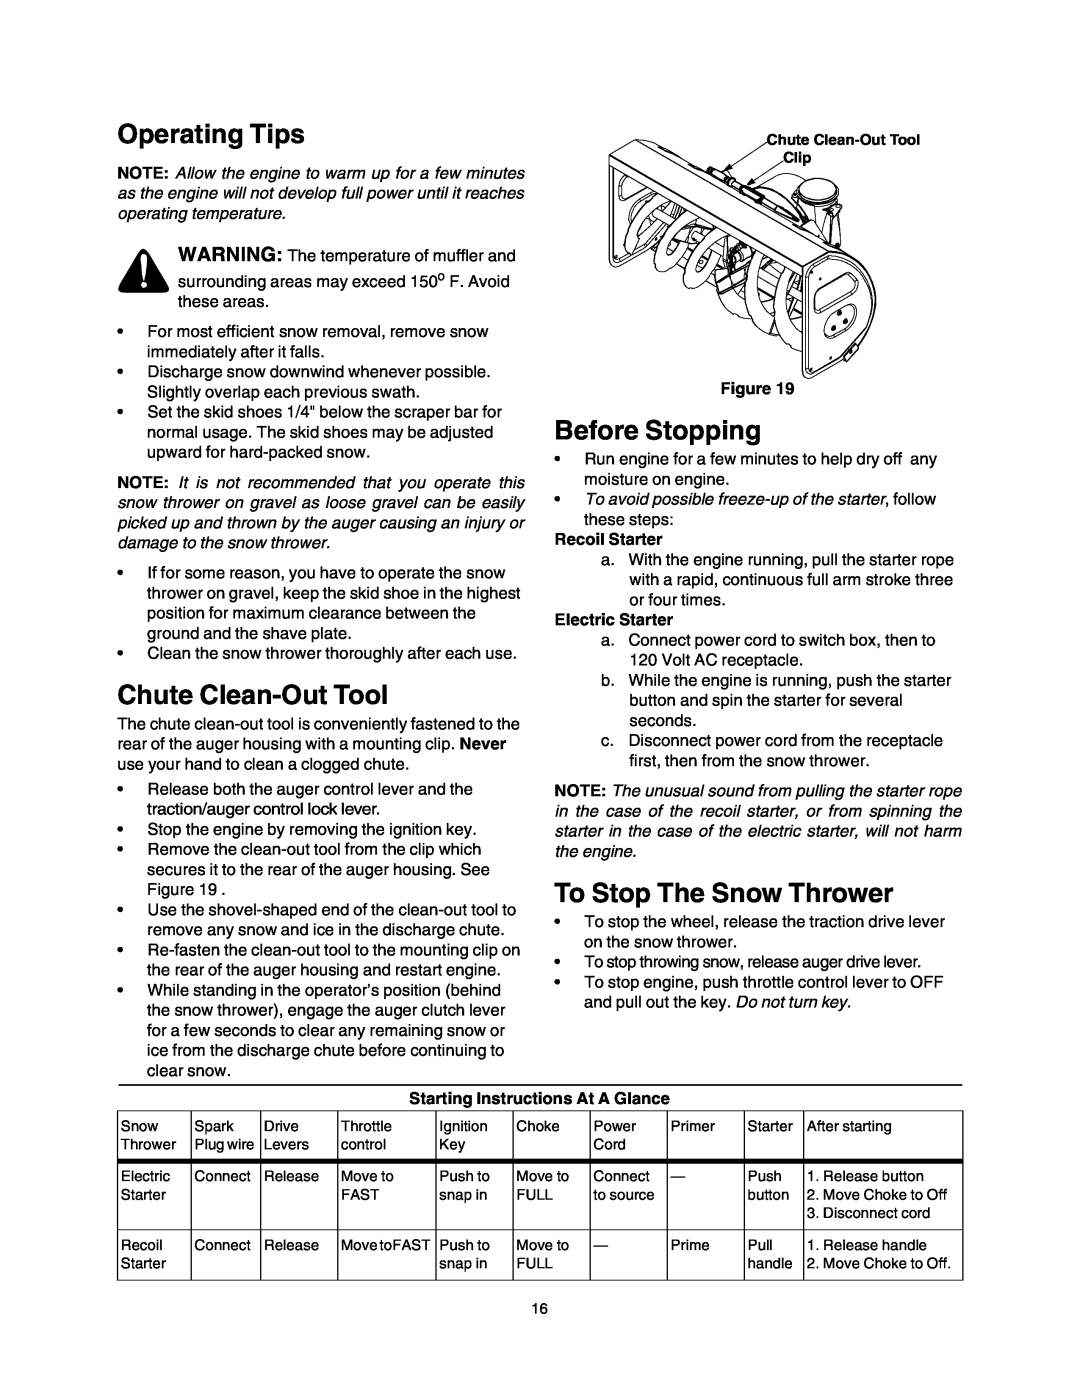 Sears 247.88853 owner manual Operating Tips, Before Stopping, To Stop The Snow Thrower, Chute Clean-Out Tool 